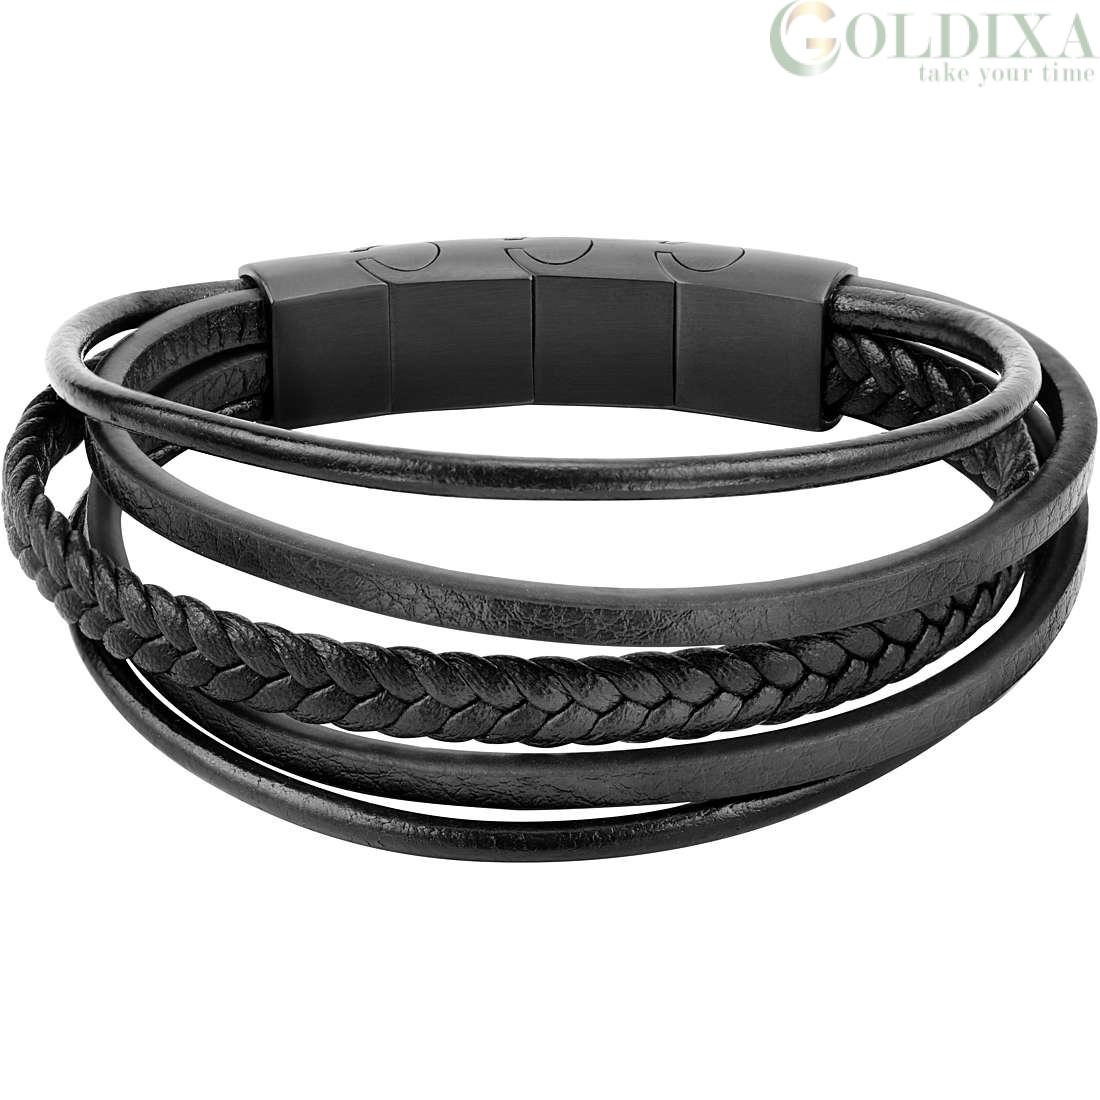 NIALAYA JEWELRY - Men's Black Stingray Bracelet with Vintage Silver Accent,  $350 - https://www.nialaya.com/collections/stingray-bracelets-for-men /products/stingray-black-vintage-silver Men's Beaded Bracelet with Silver  Indian Logo Beads, $400 - https ...